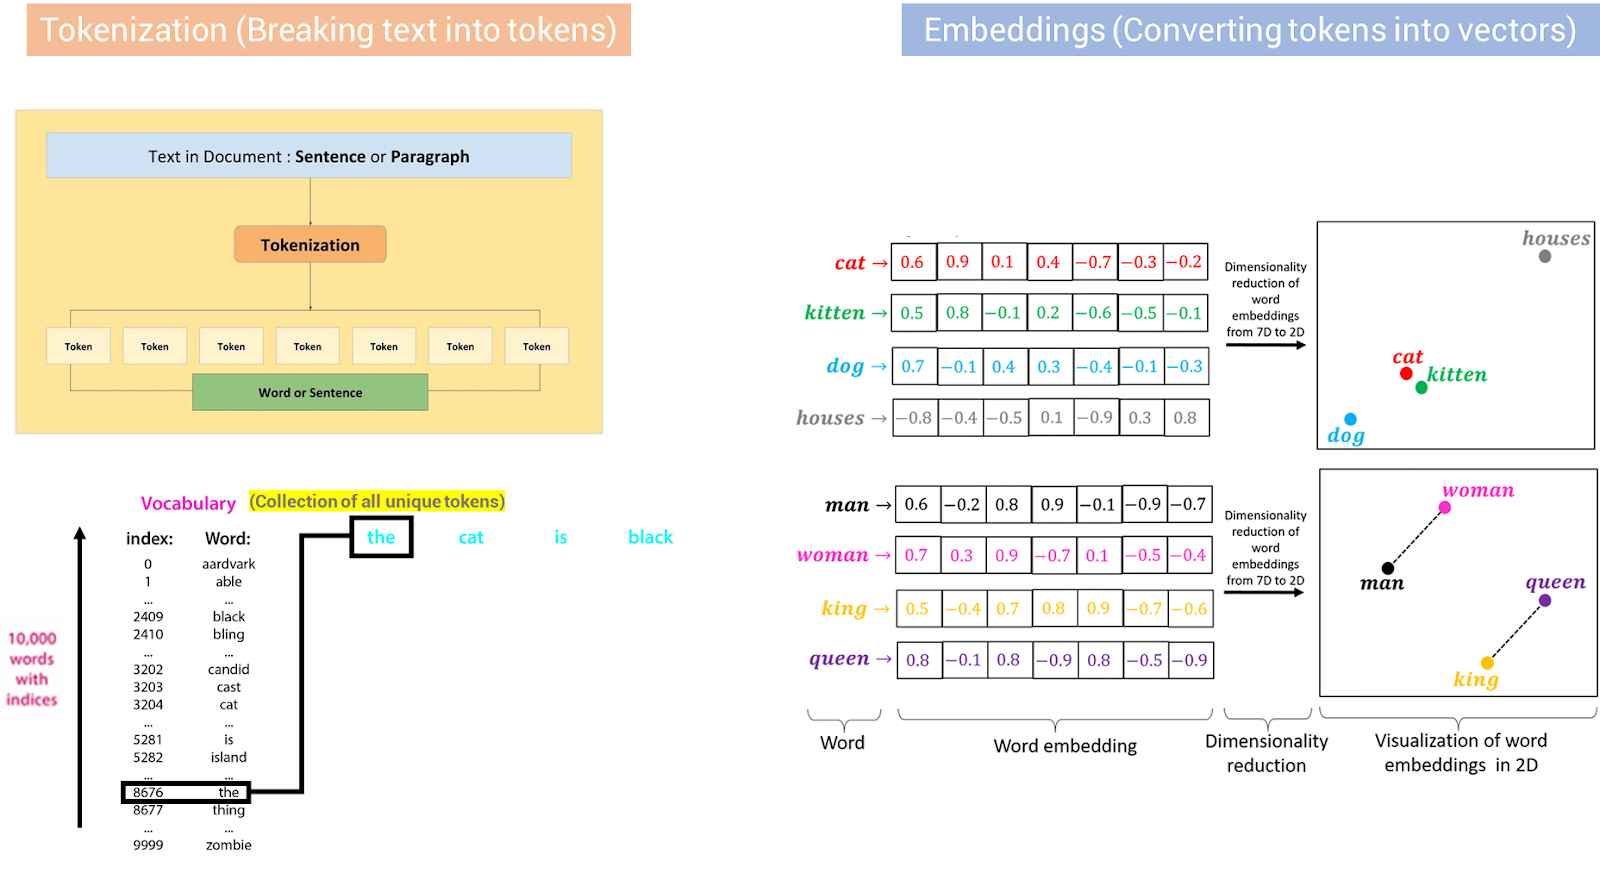 Tokenization, Vocabulary formation, and Embeddings are shown in one picture. Note that the choice of which tokenizer to use and the embedding algorithm are many.